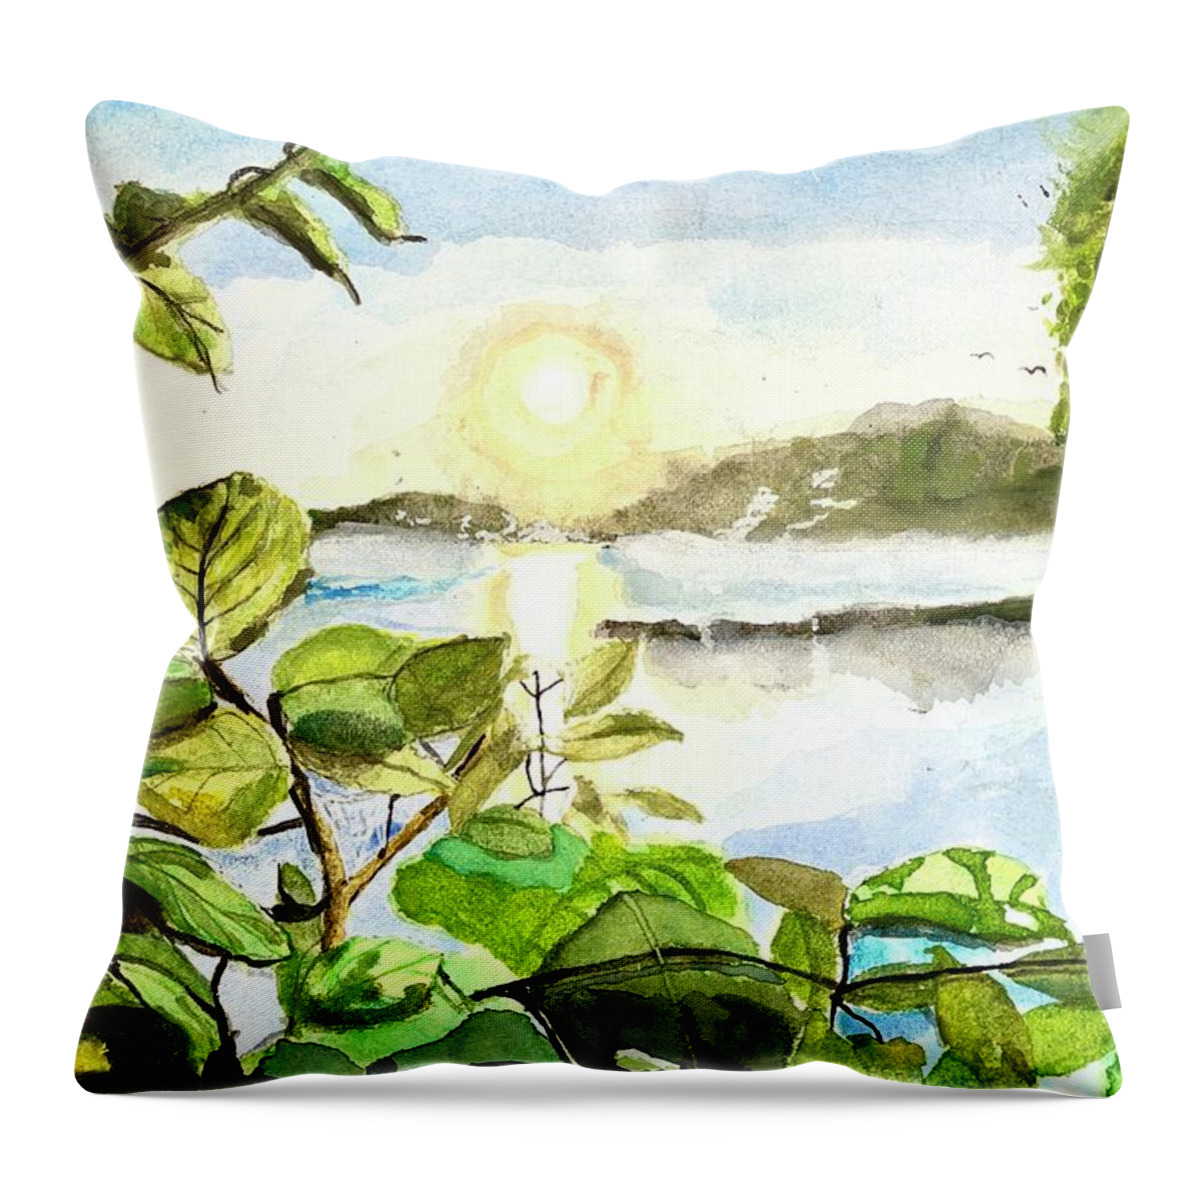 Lake Throw Pillow featuring the painting Lake Winyah by Bryan Brouwer